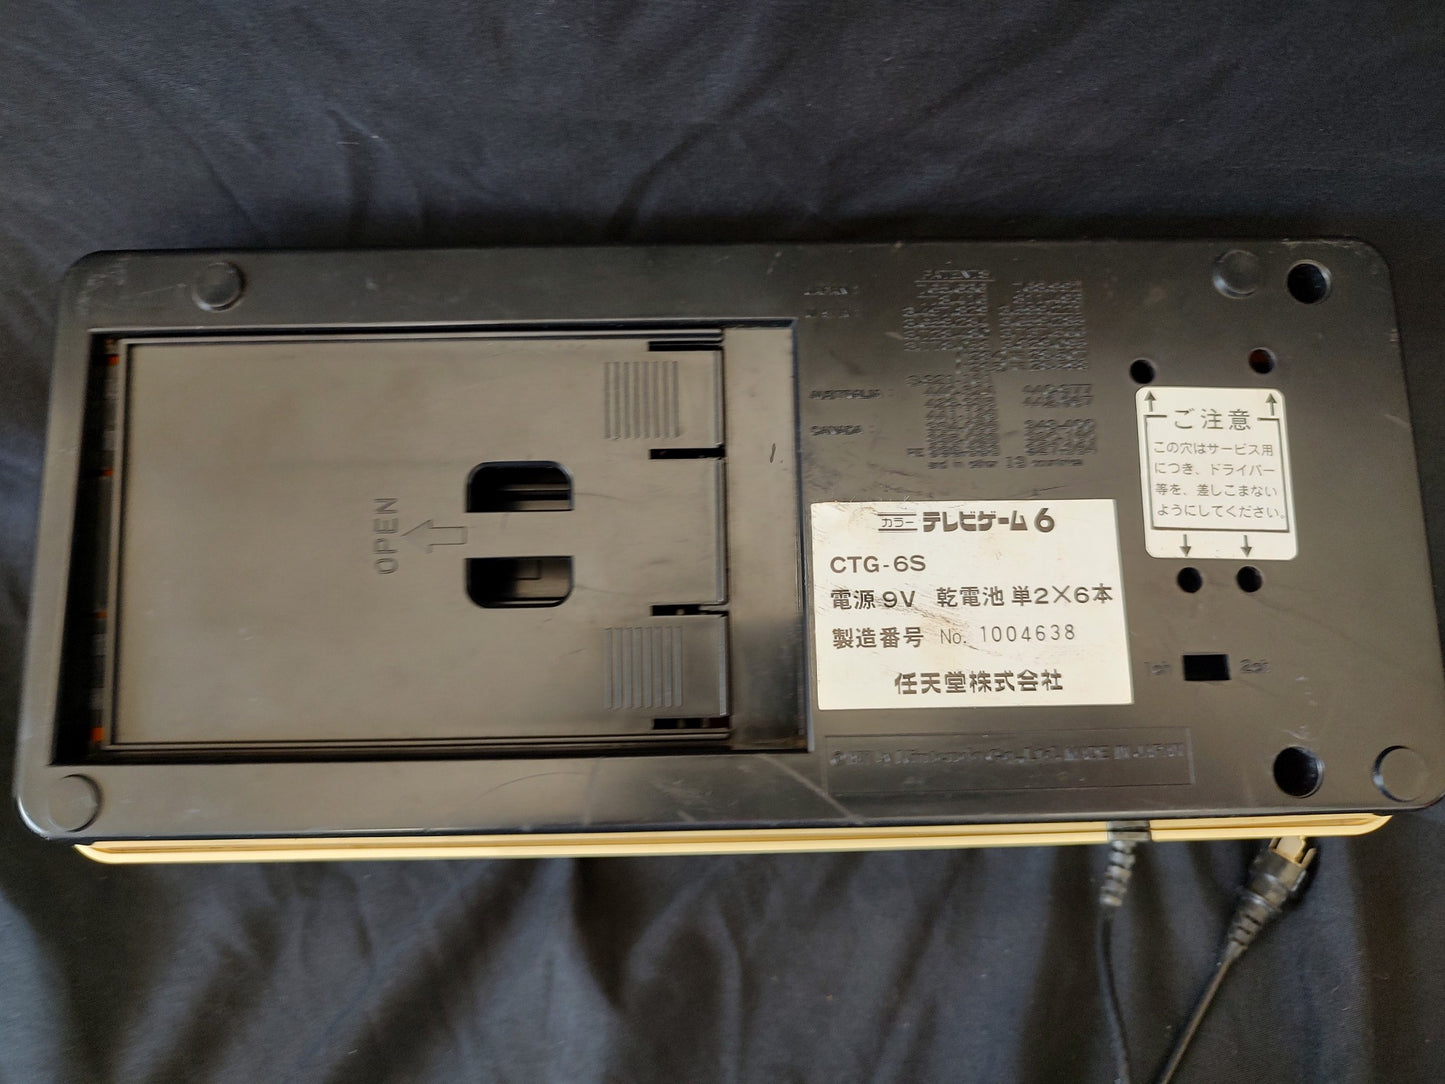 Defective Nintendo TV GAME 6 (CTG-6S) console system, Working -g0318-5